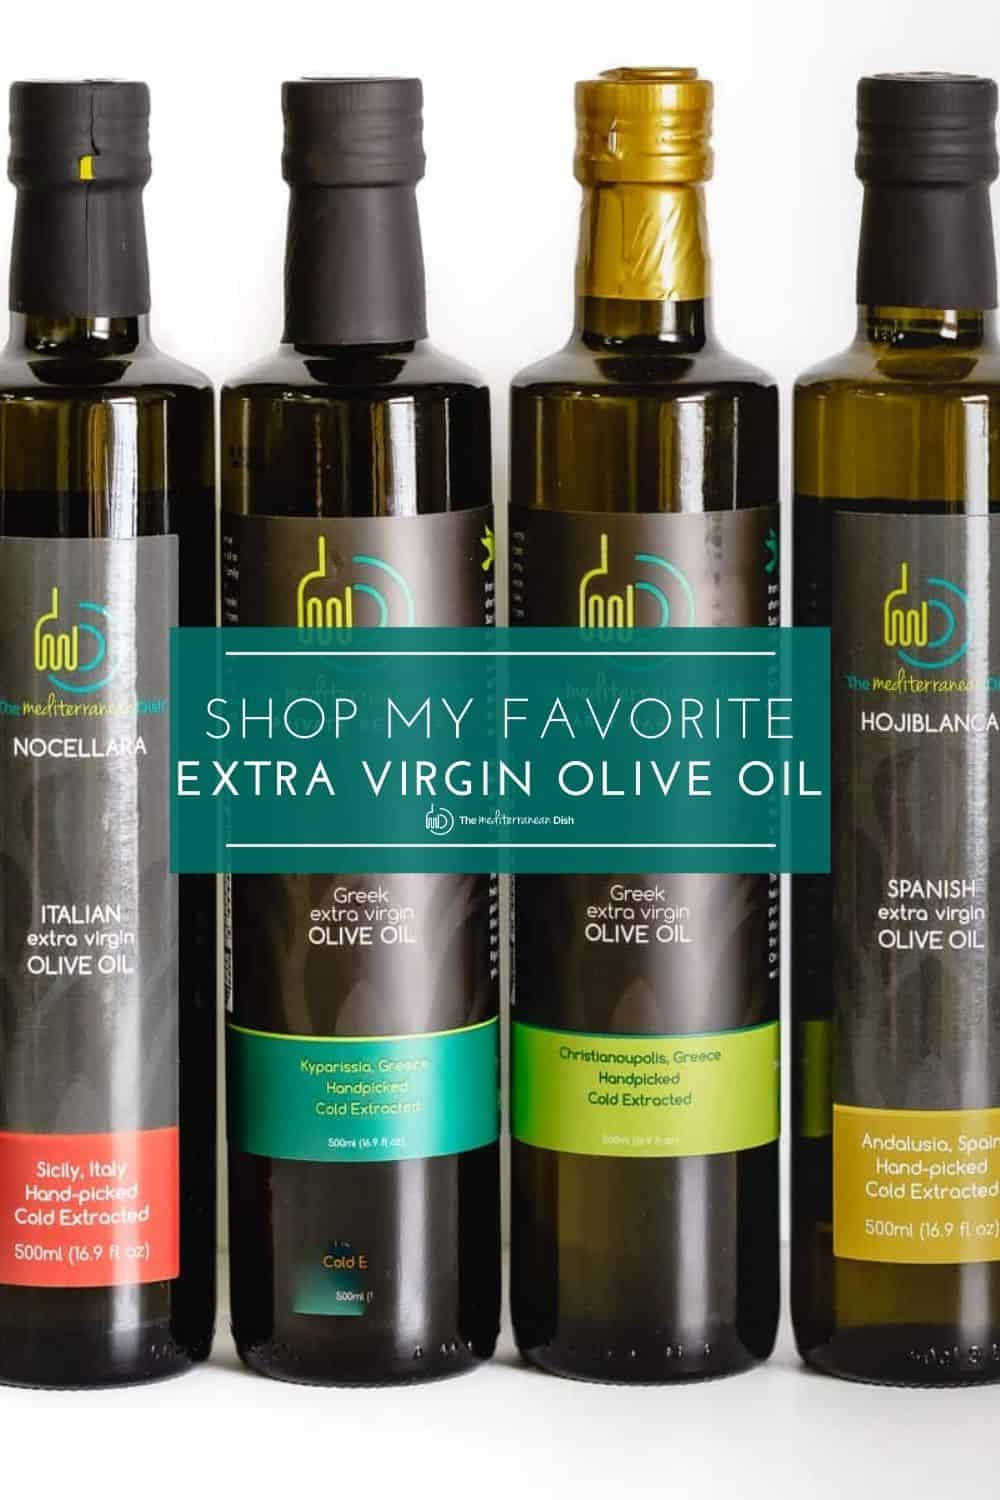 The Mediterranean Dish extra virgin olive oil selection